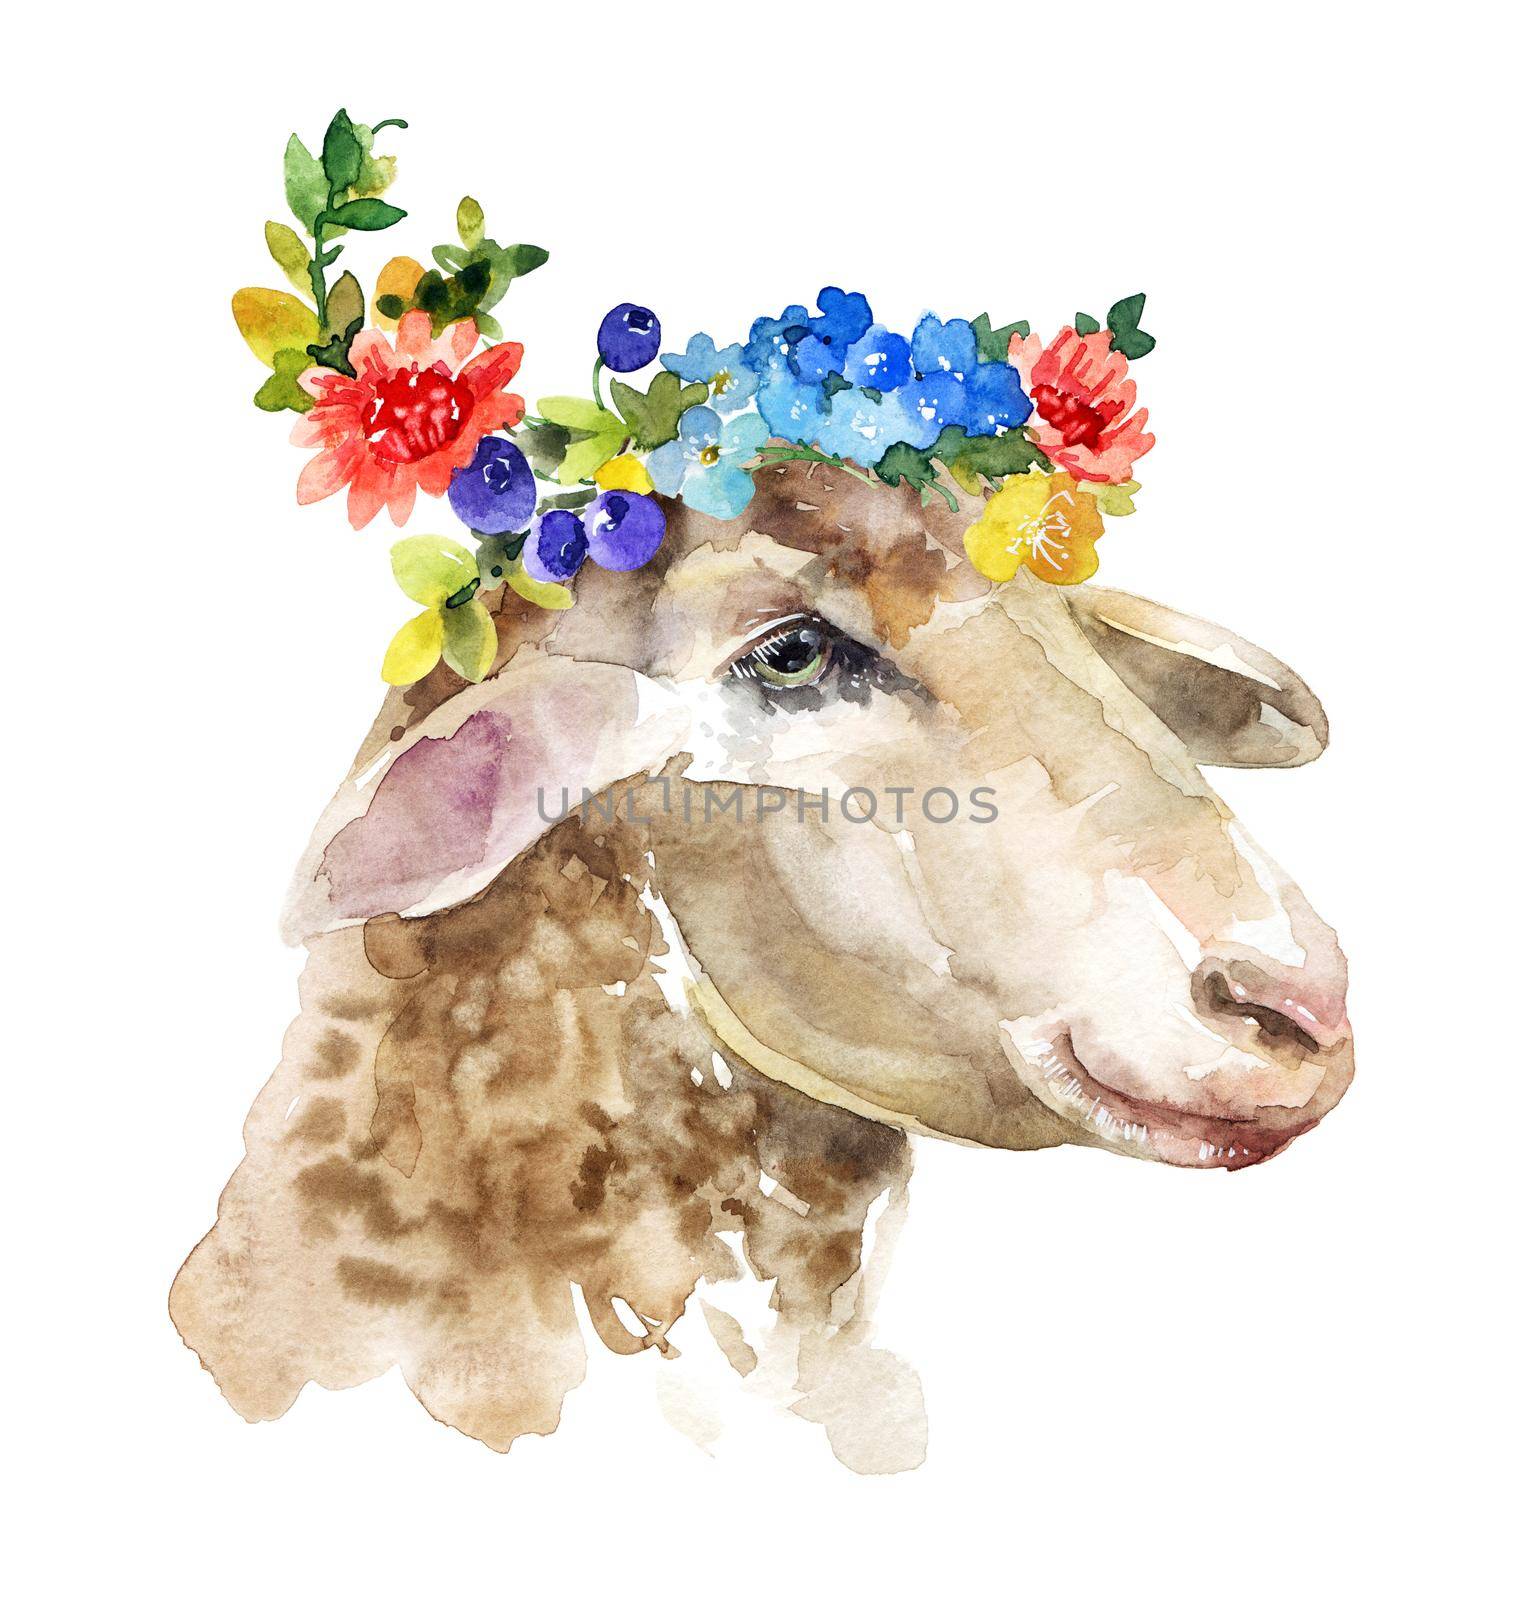 Watercolor illustration of sheep portrait with flowers wreath on the head